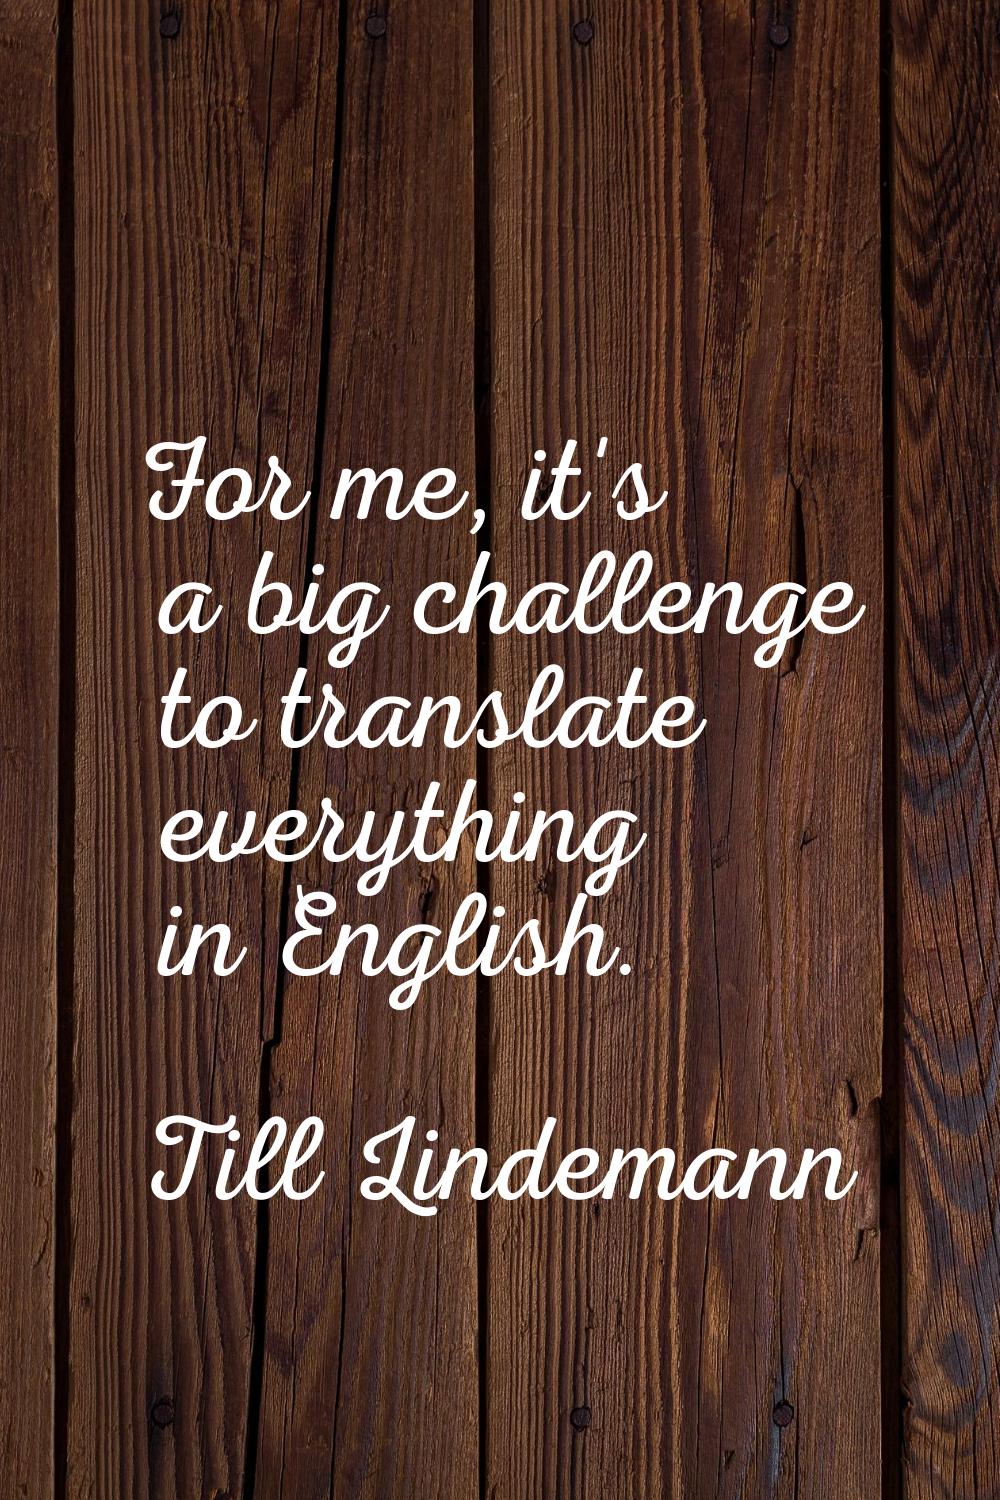 For me, it's a big challenge to translate everything in English.